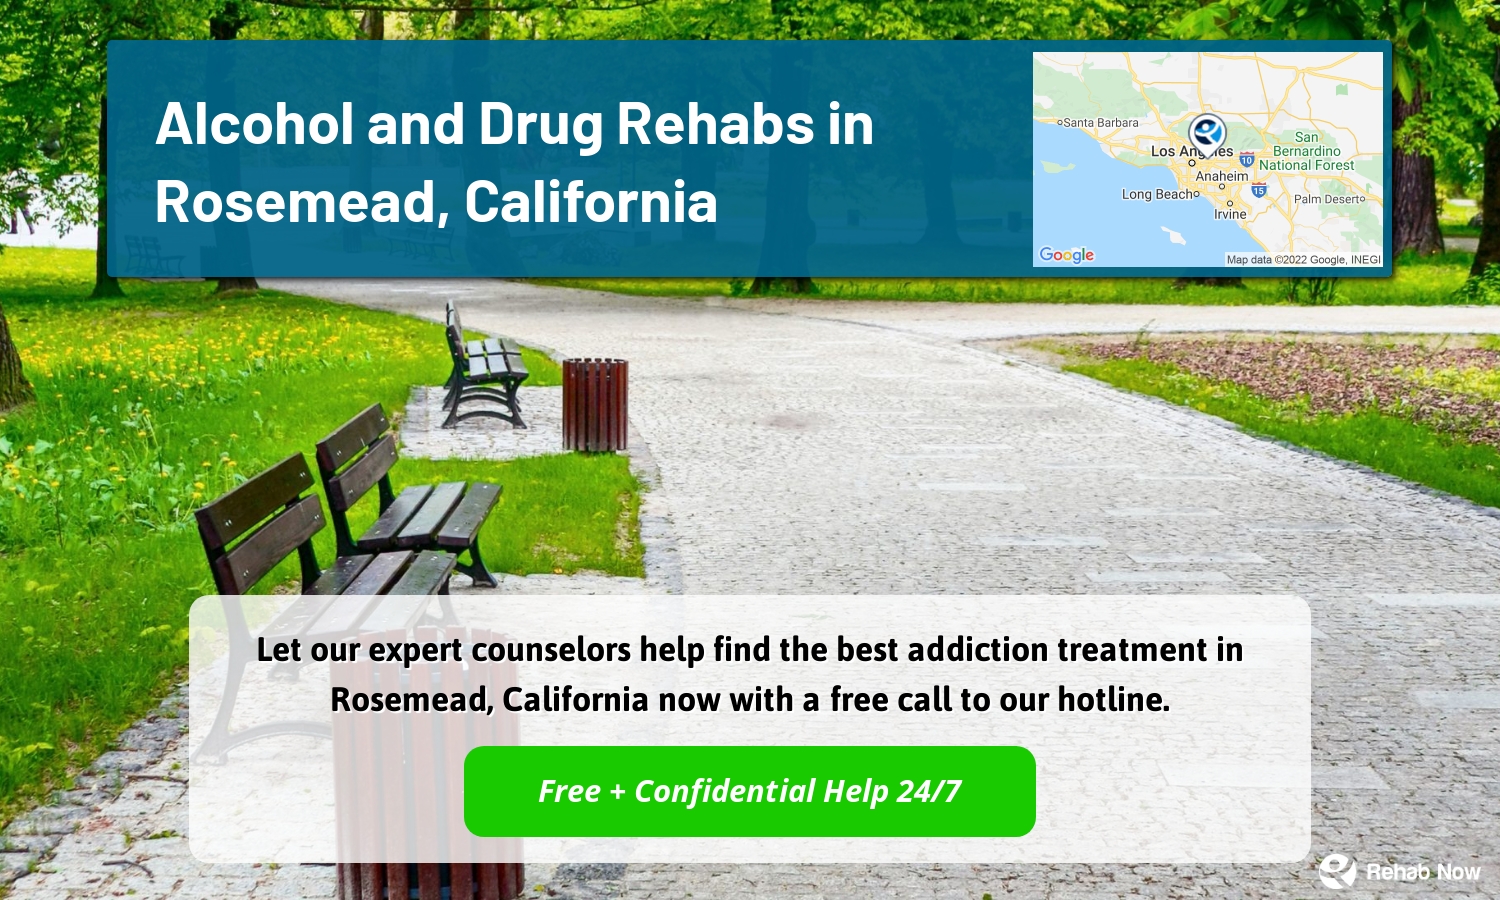 Let our expert counselors help find the best addiction treatment in Rosemead, California now with a free call to our hotline.